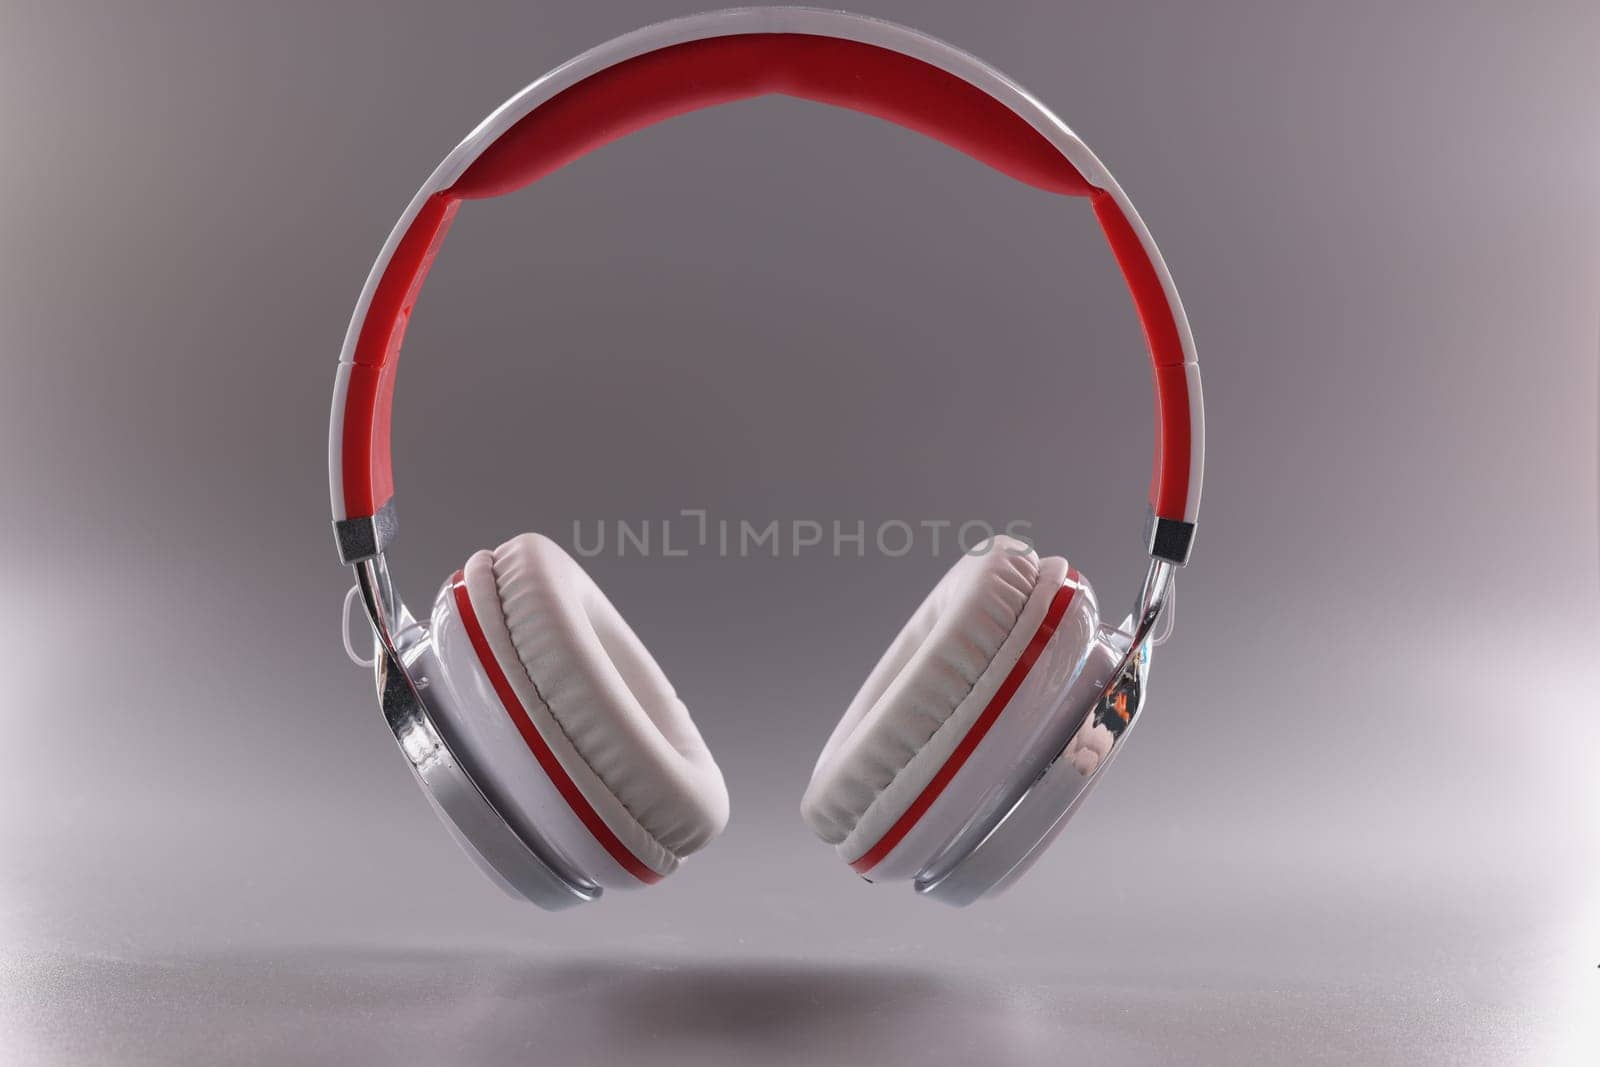 White red modern headphones on gray background. Headphones-headset for computer and phone concept